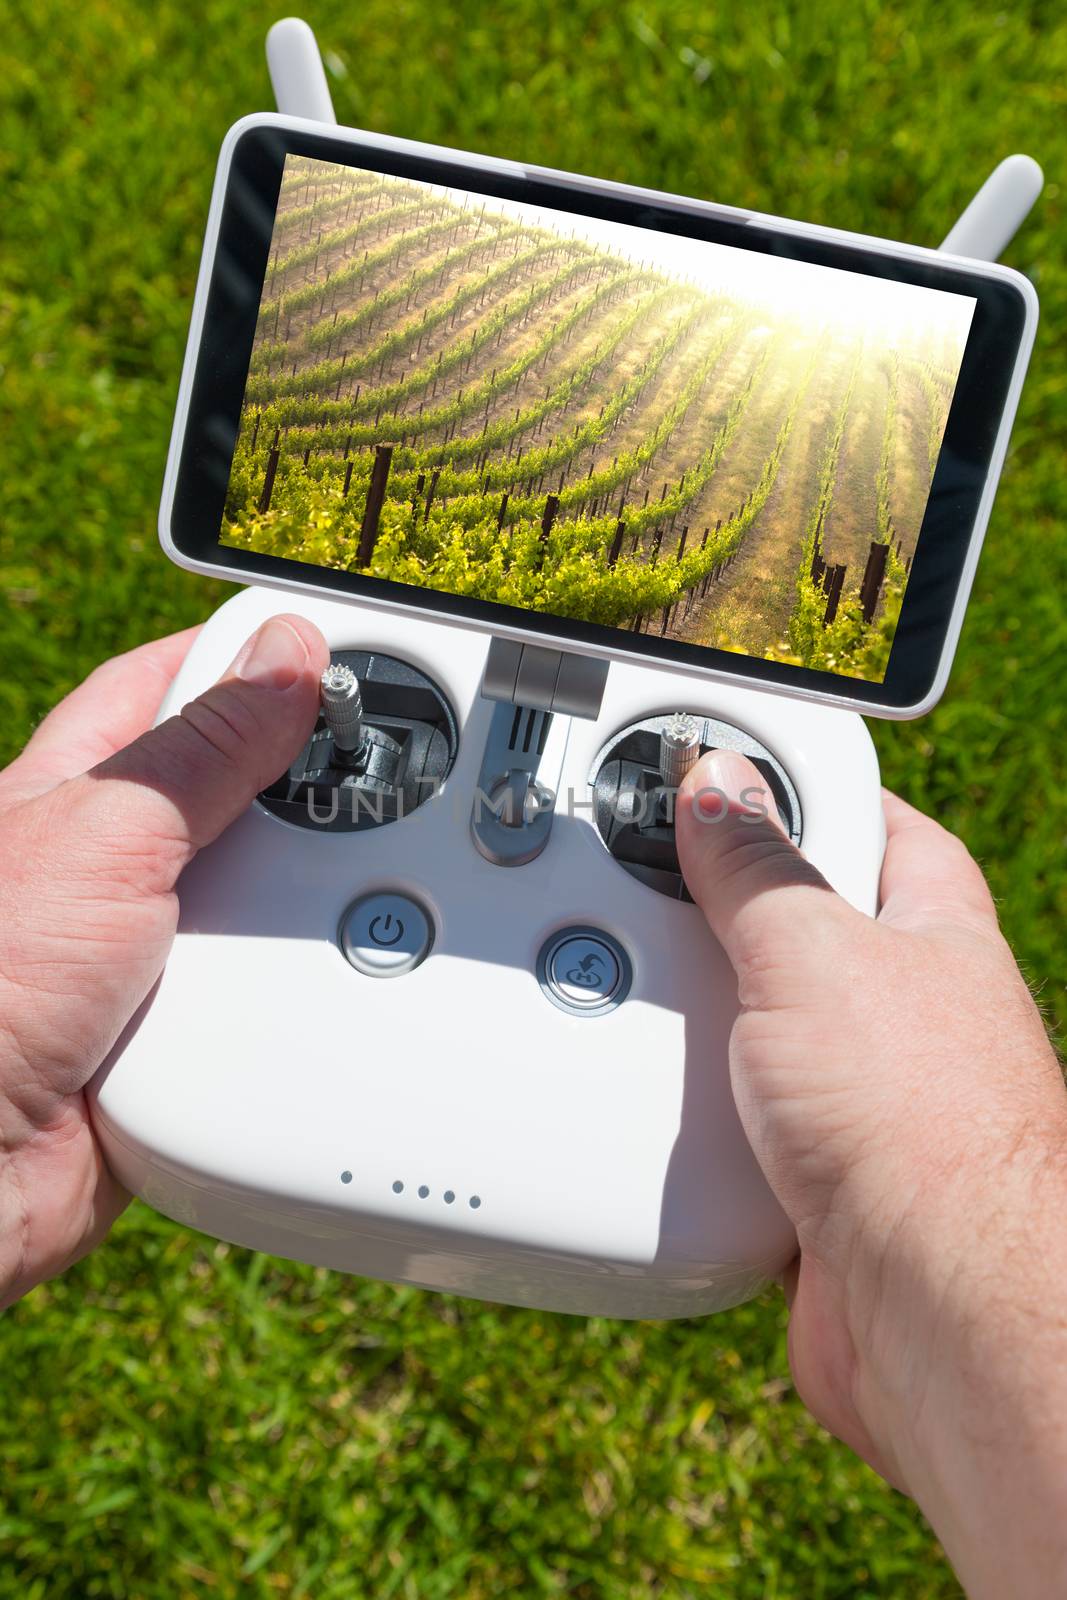 Hands Holding Drone Quadcopter Controller With Beautiful Grape Vineyard View on Screen. by Feverpitched